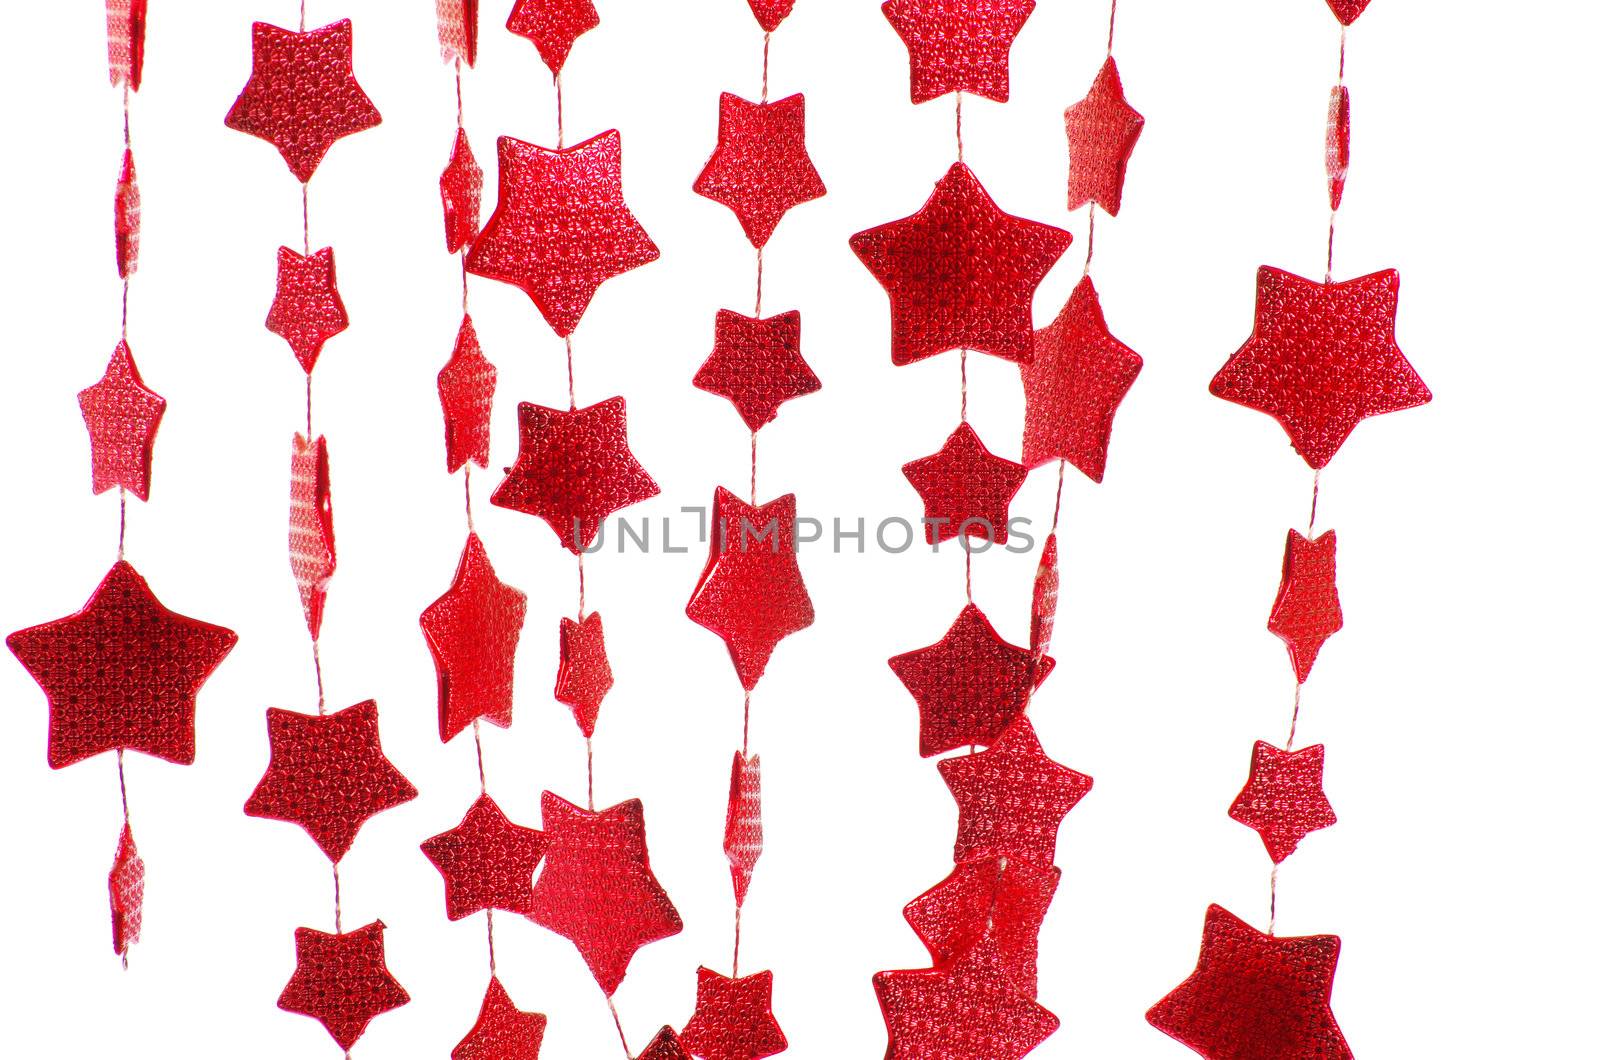  stars isolated on a white